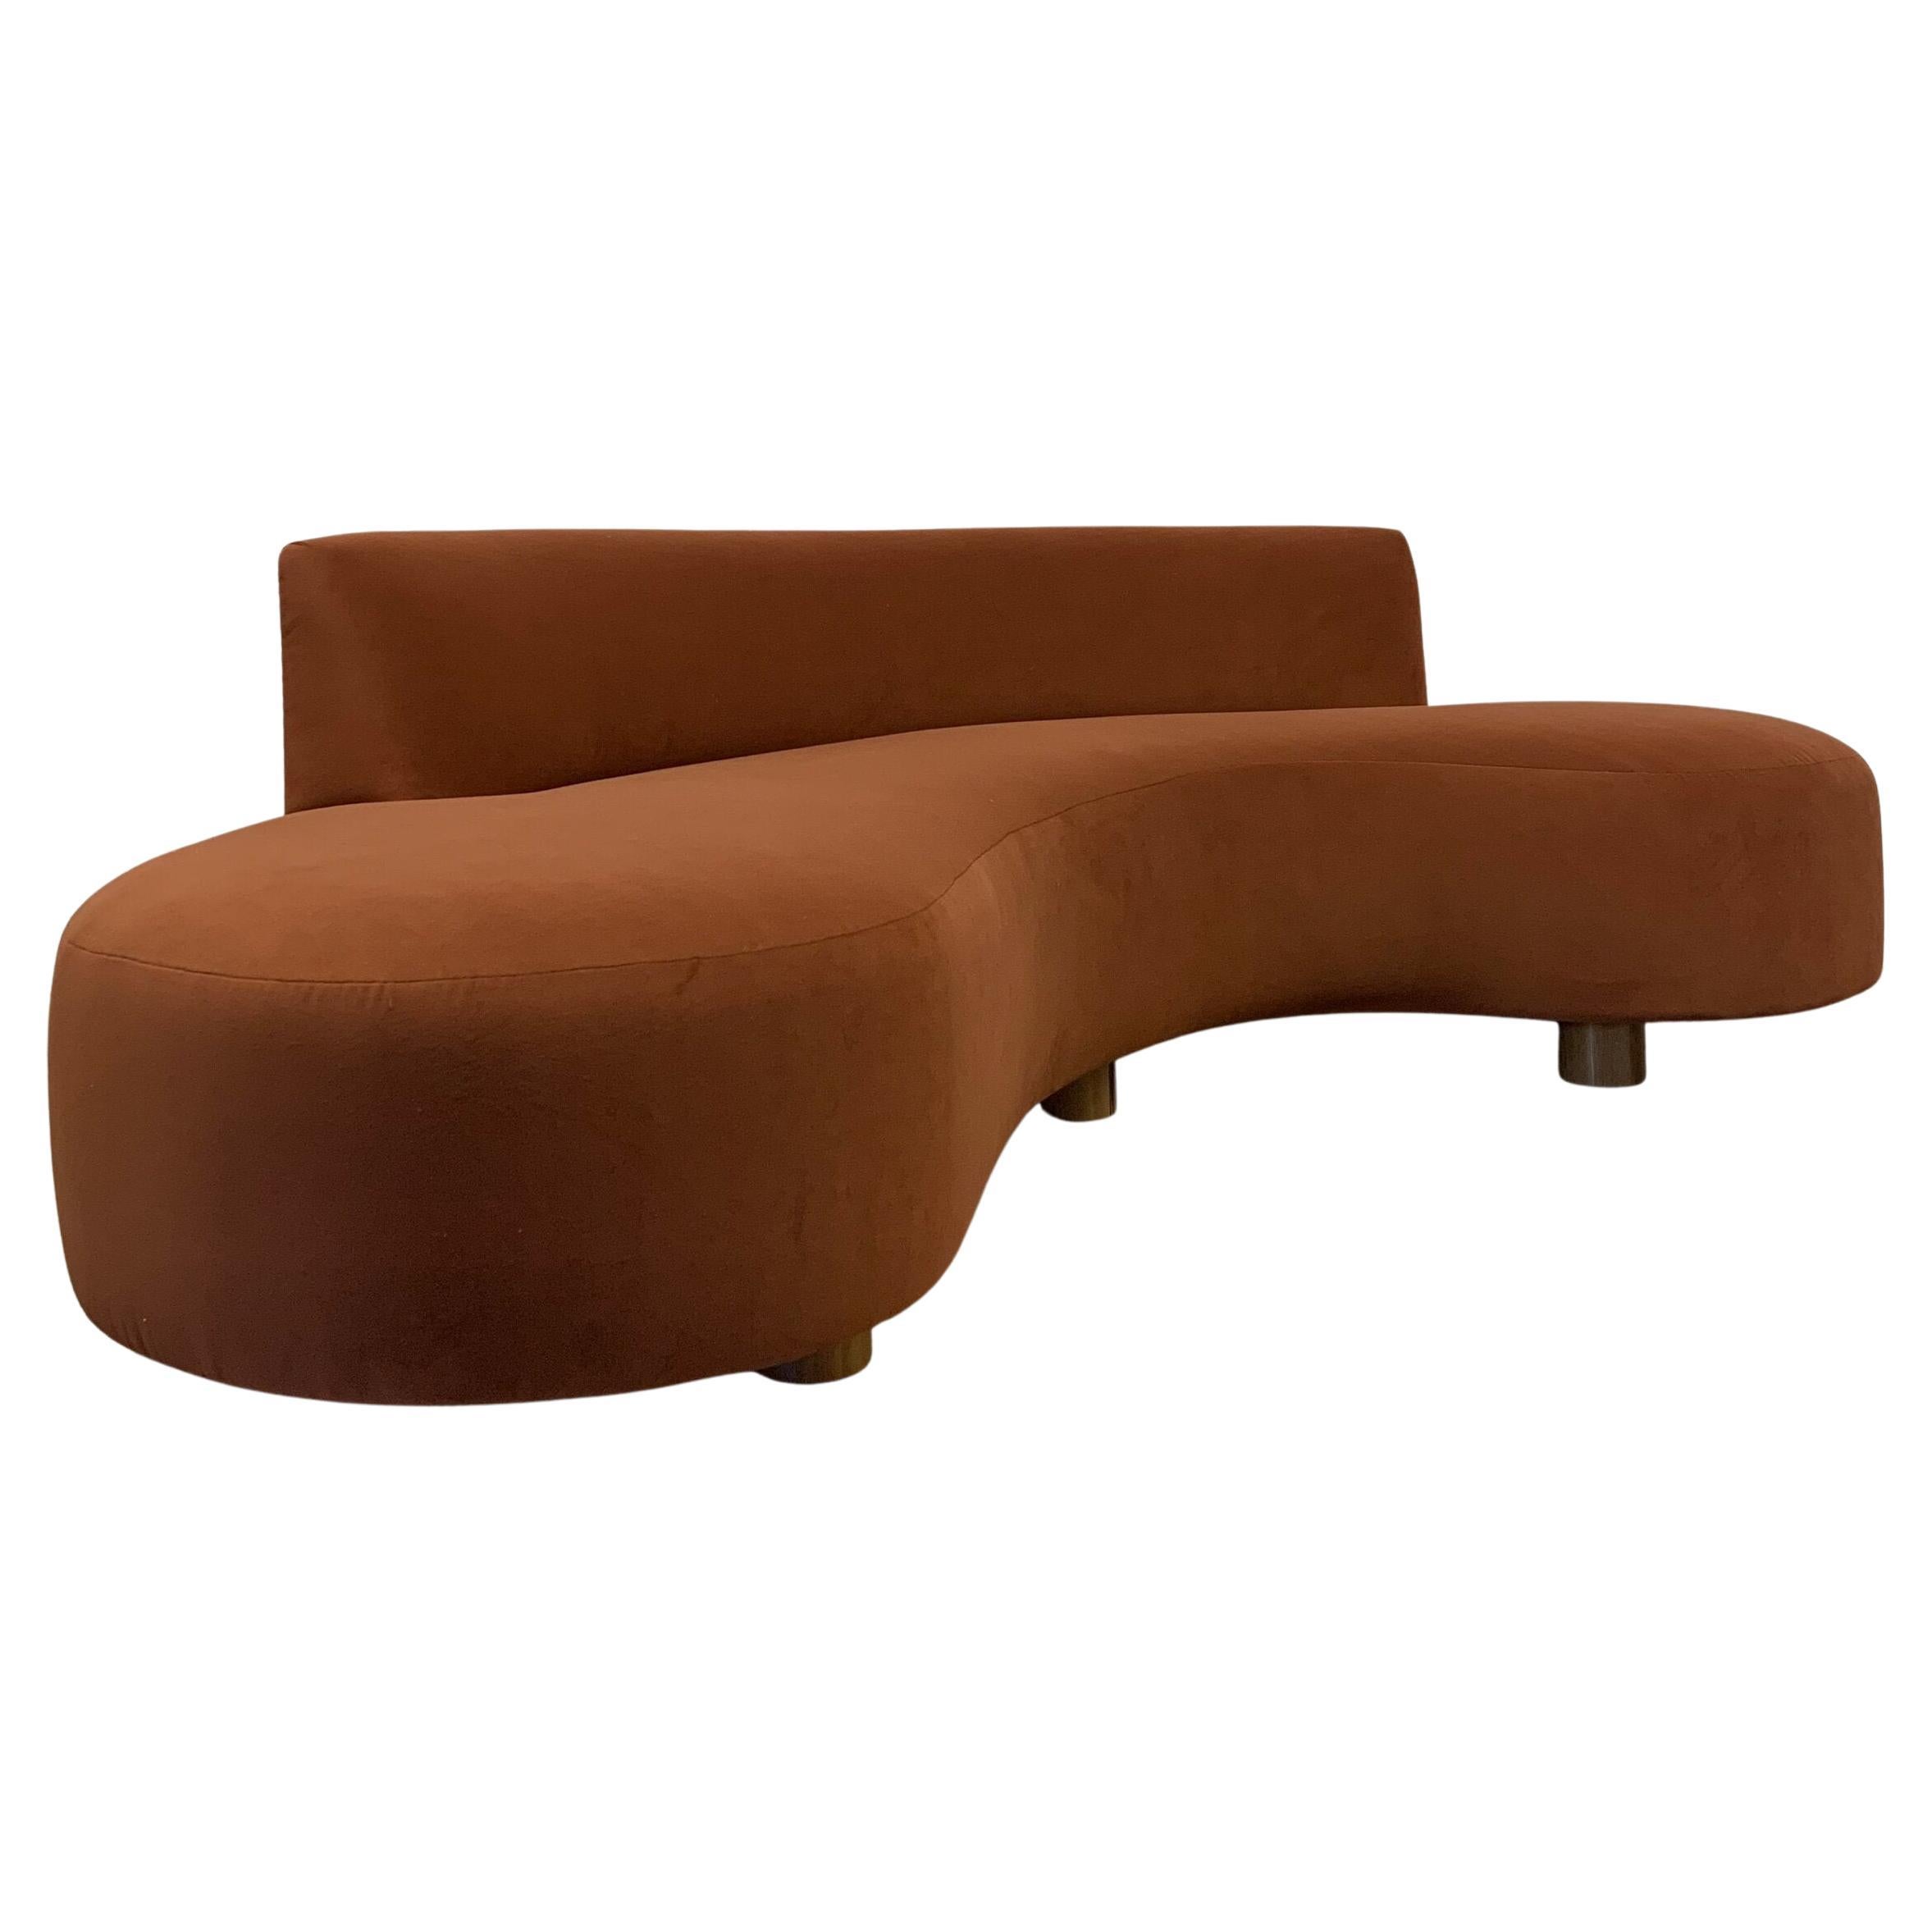 Made to Order Wave Sofa By VOP For Sale